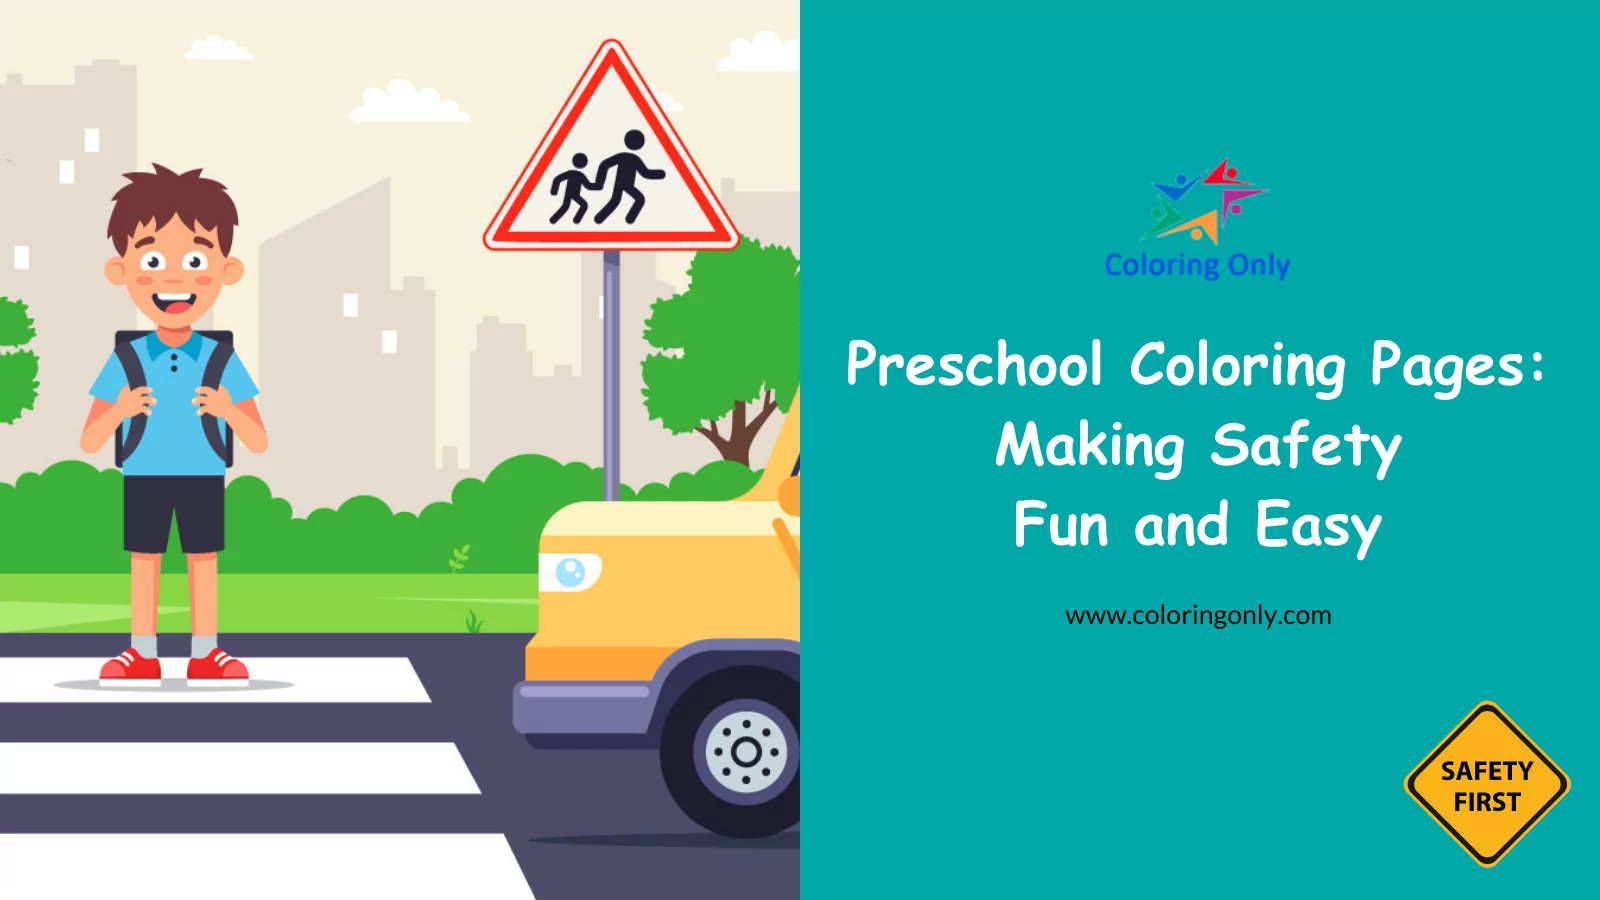 Preschool Coloring Pages: Making Safety Fun and Easy